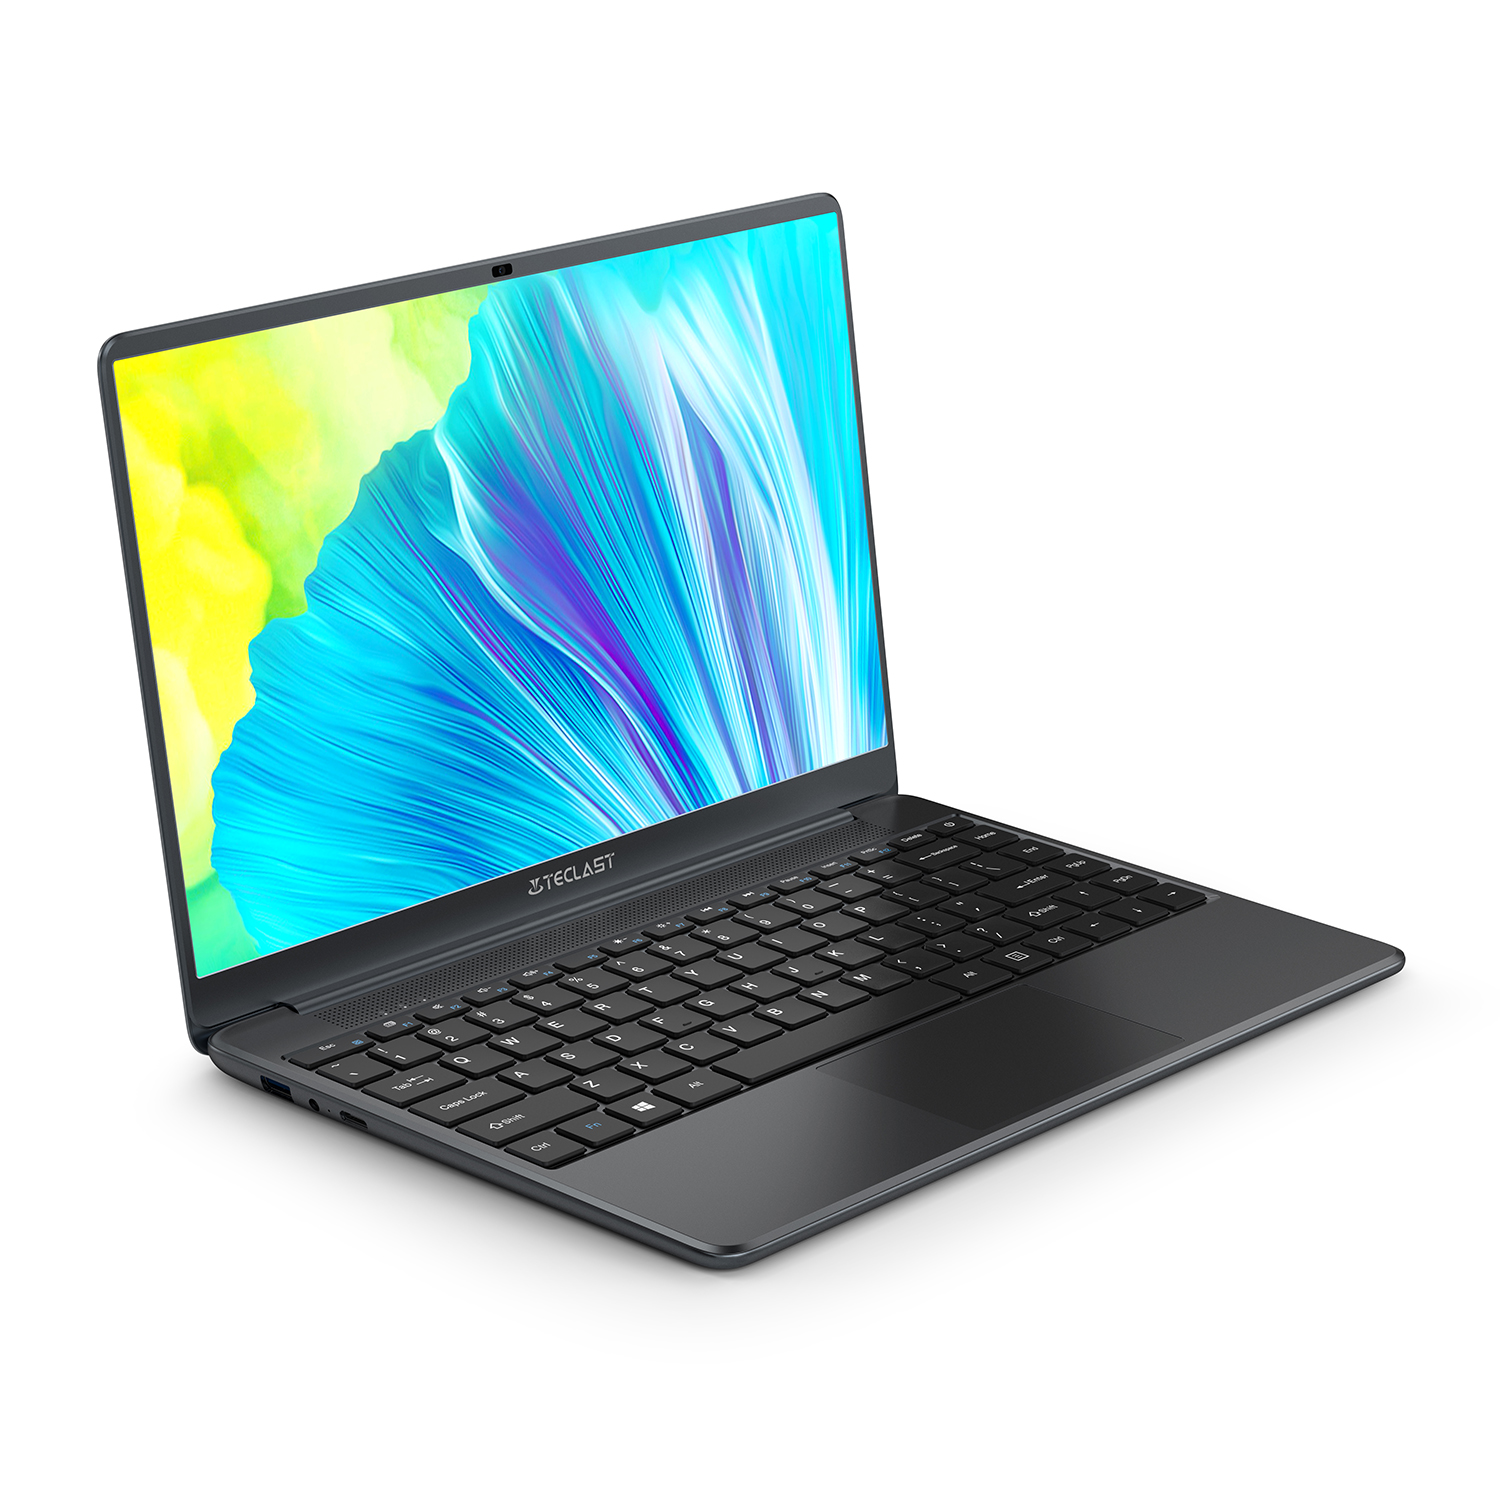 Find EU Direct Teclast F7 Plus â…¢ Laptop 14 1 inch Intel N4120 Quad Core 2 6GHz 8GB LPDDR4 RAM 256GB SSD 46W Large Battery Full Metal Cases Notebook for Sale on Gipsybee.com with cryptocurrencies